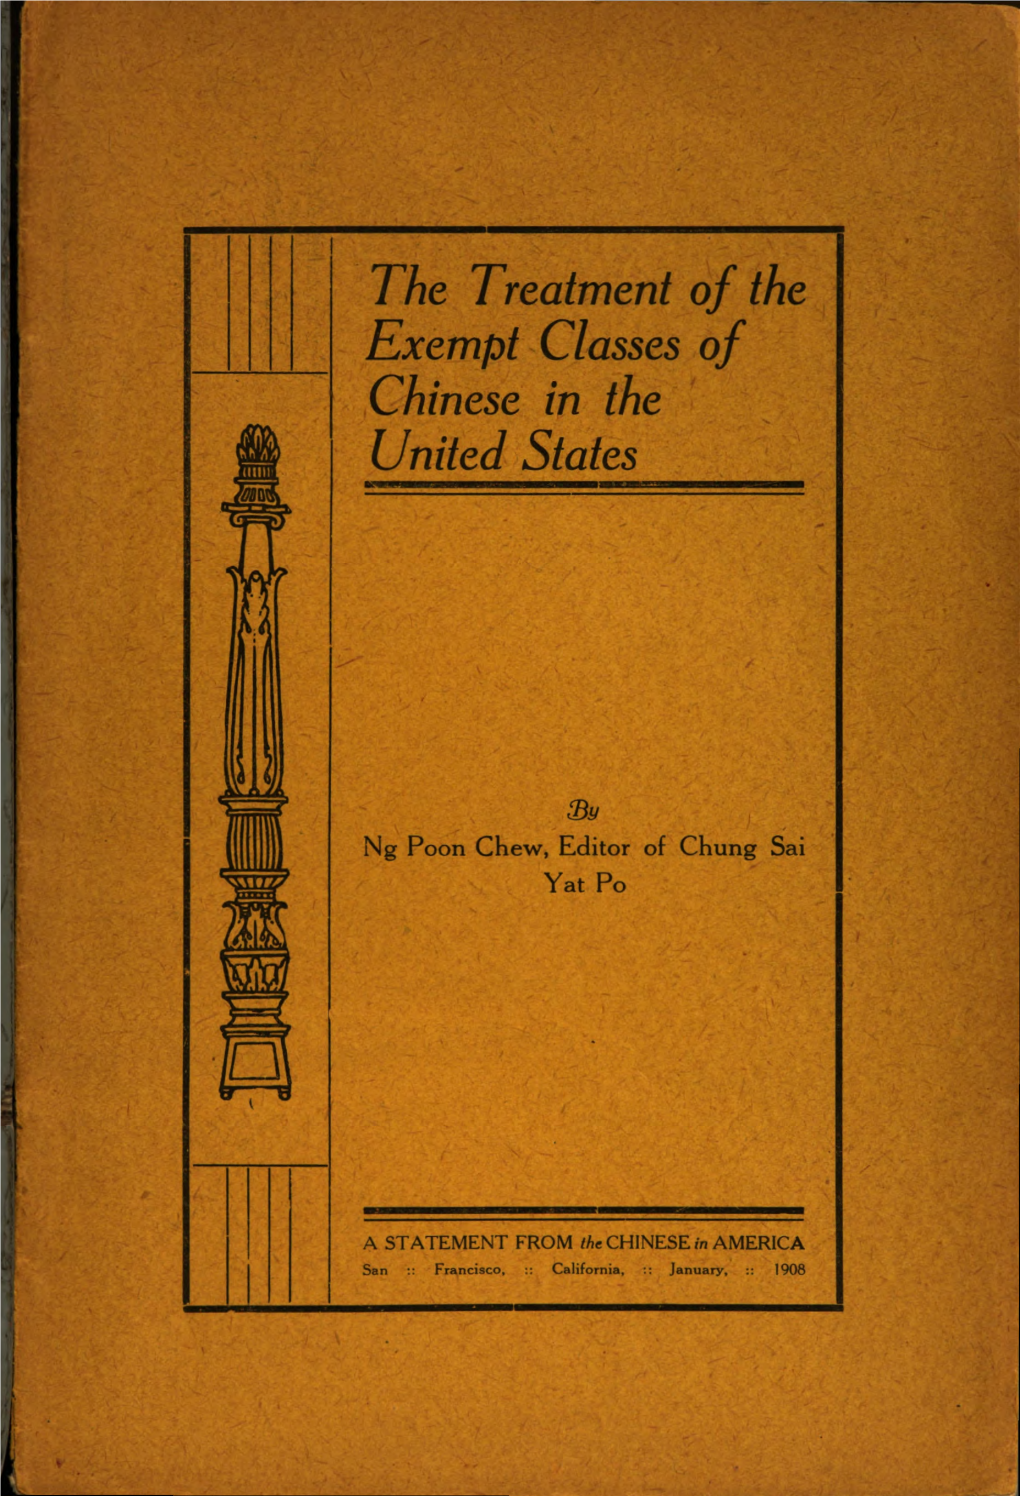 The Treatment of the Exempt Classes of Chinese in the United States